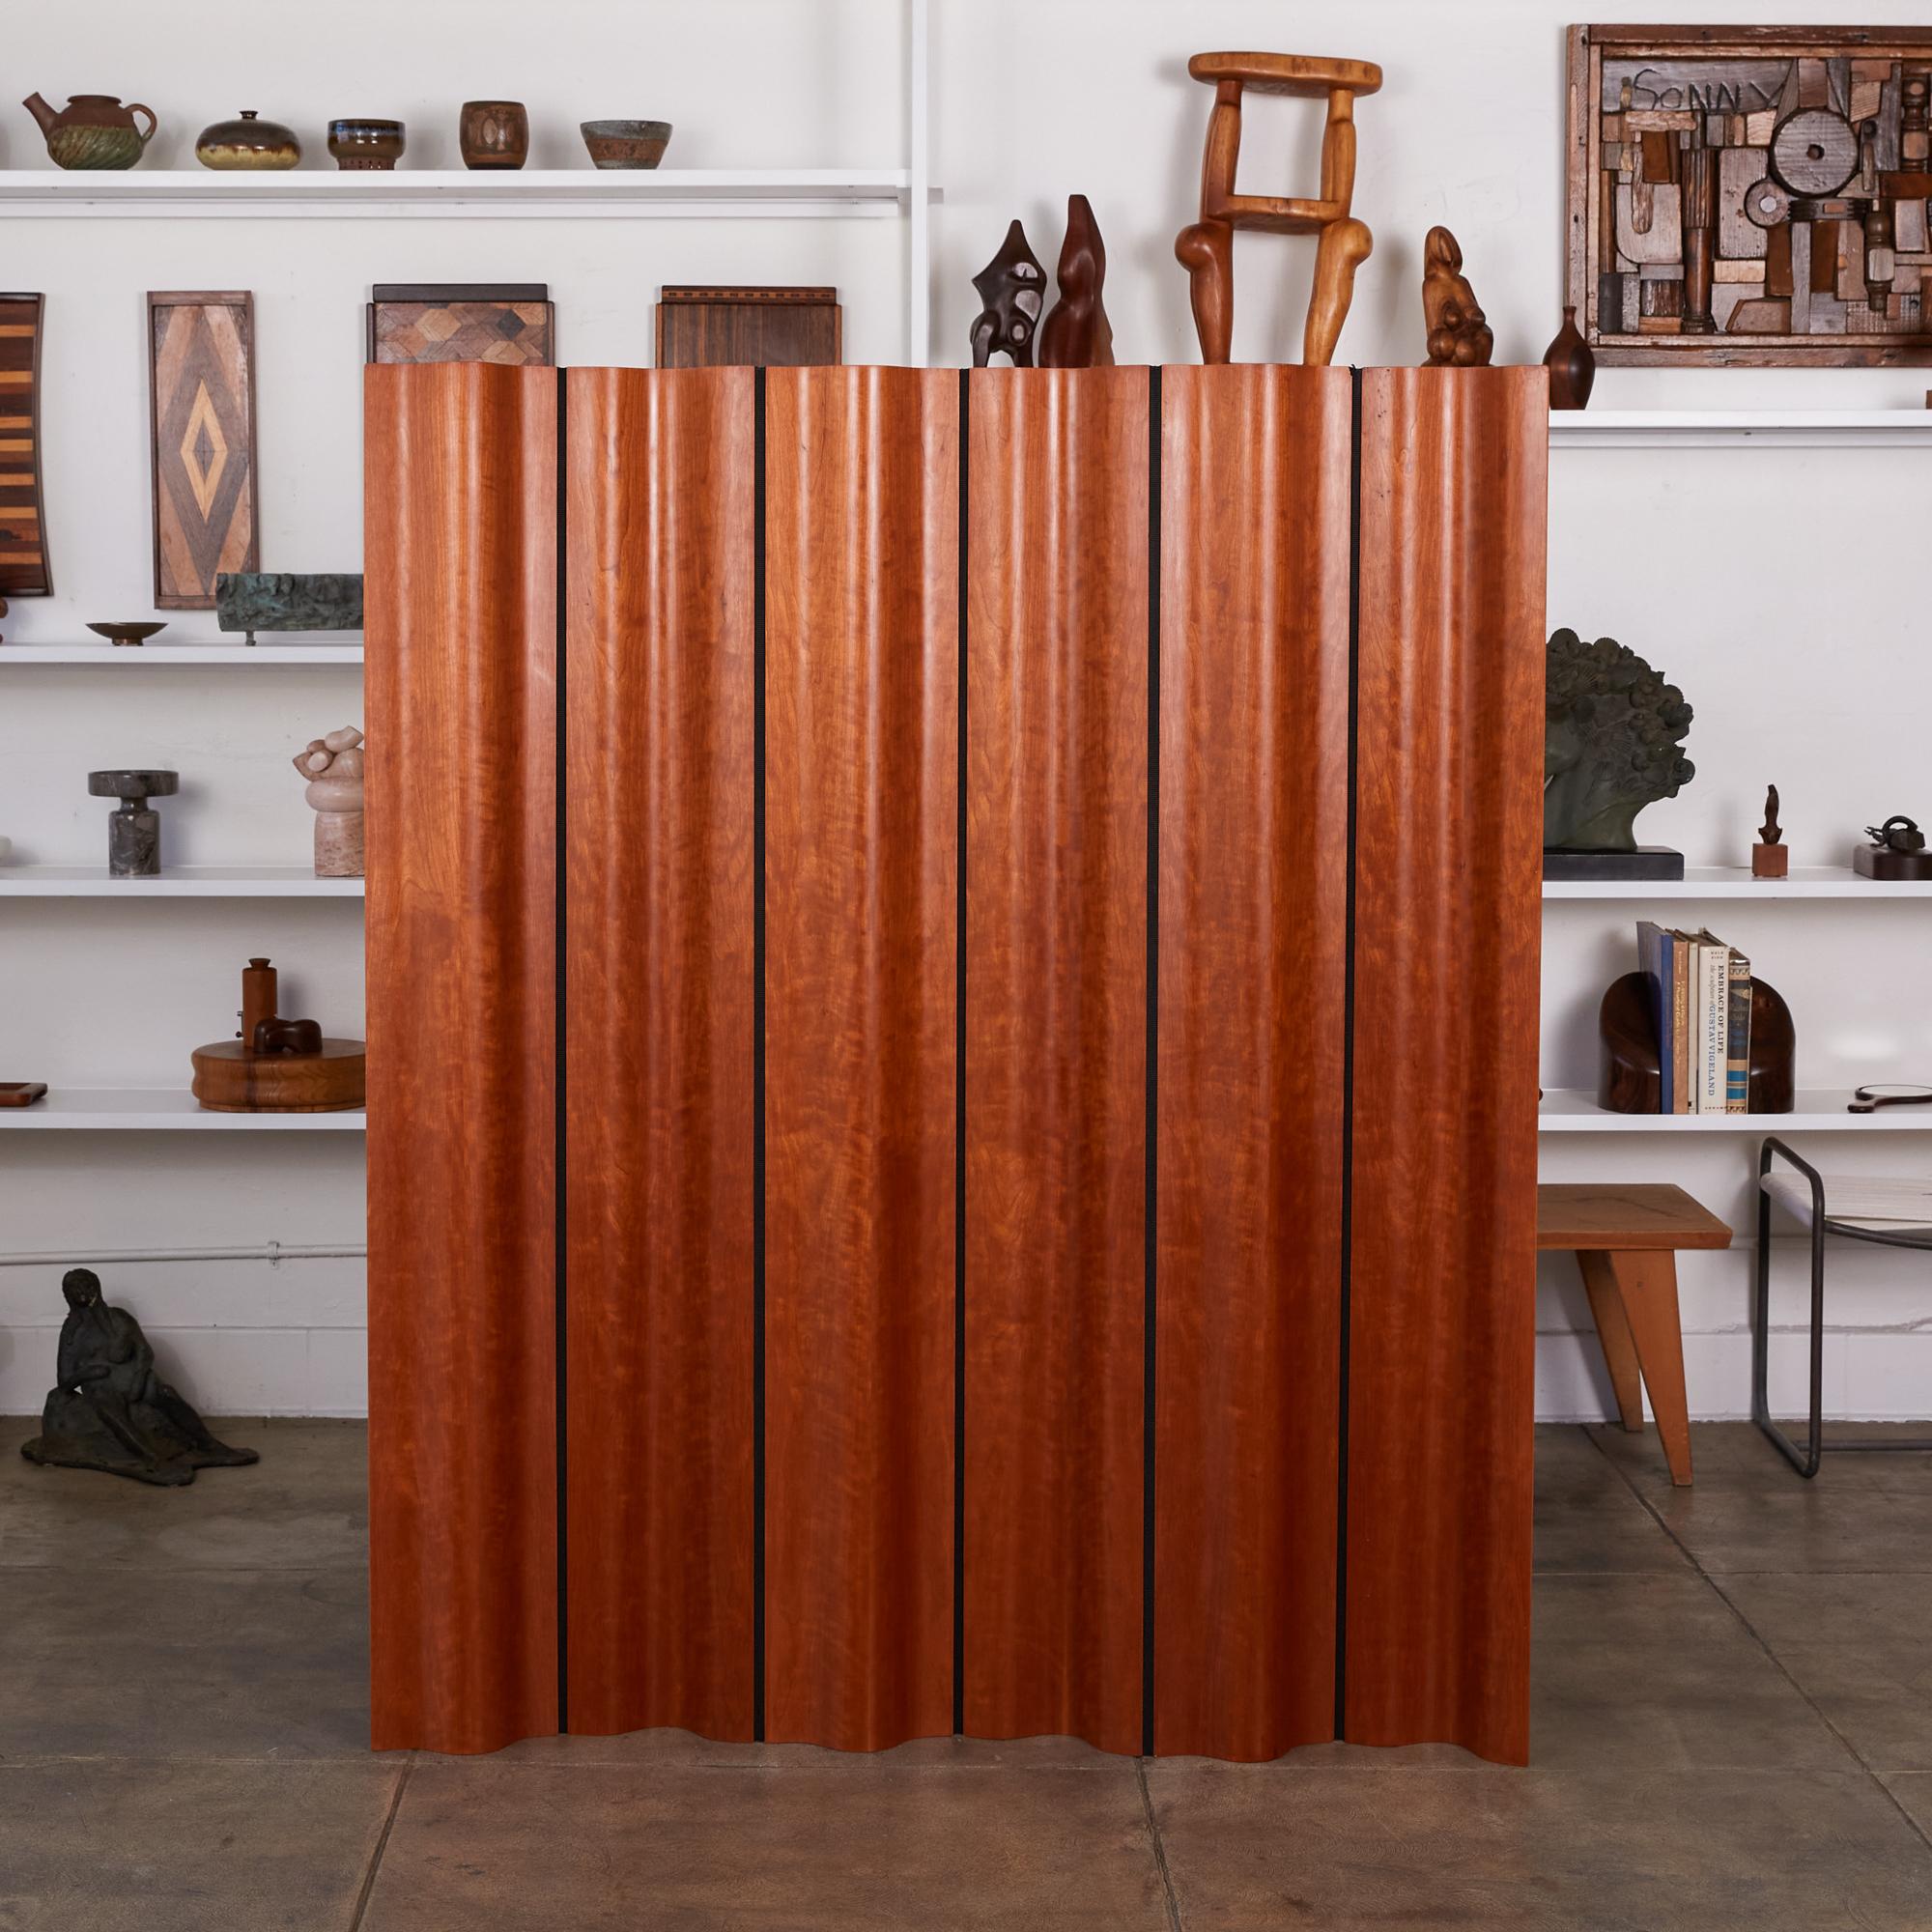 Ray and Charles Eames’ iconic folding screen, FSW-6, for Herman Miller takes the inspiration for its undulating shape from the folds of heavy drapery. Composed of articulated panels of curved plywood, sandwiched between highly figured cherry